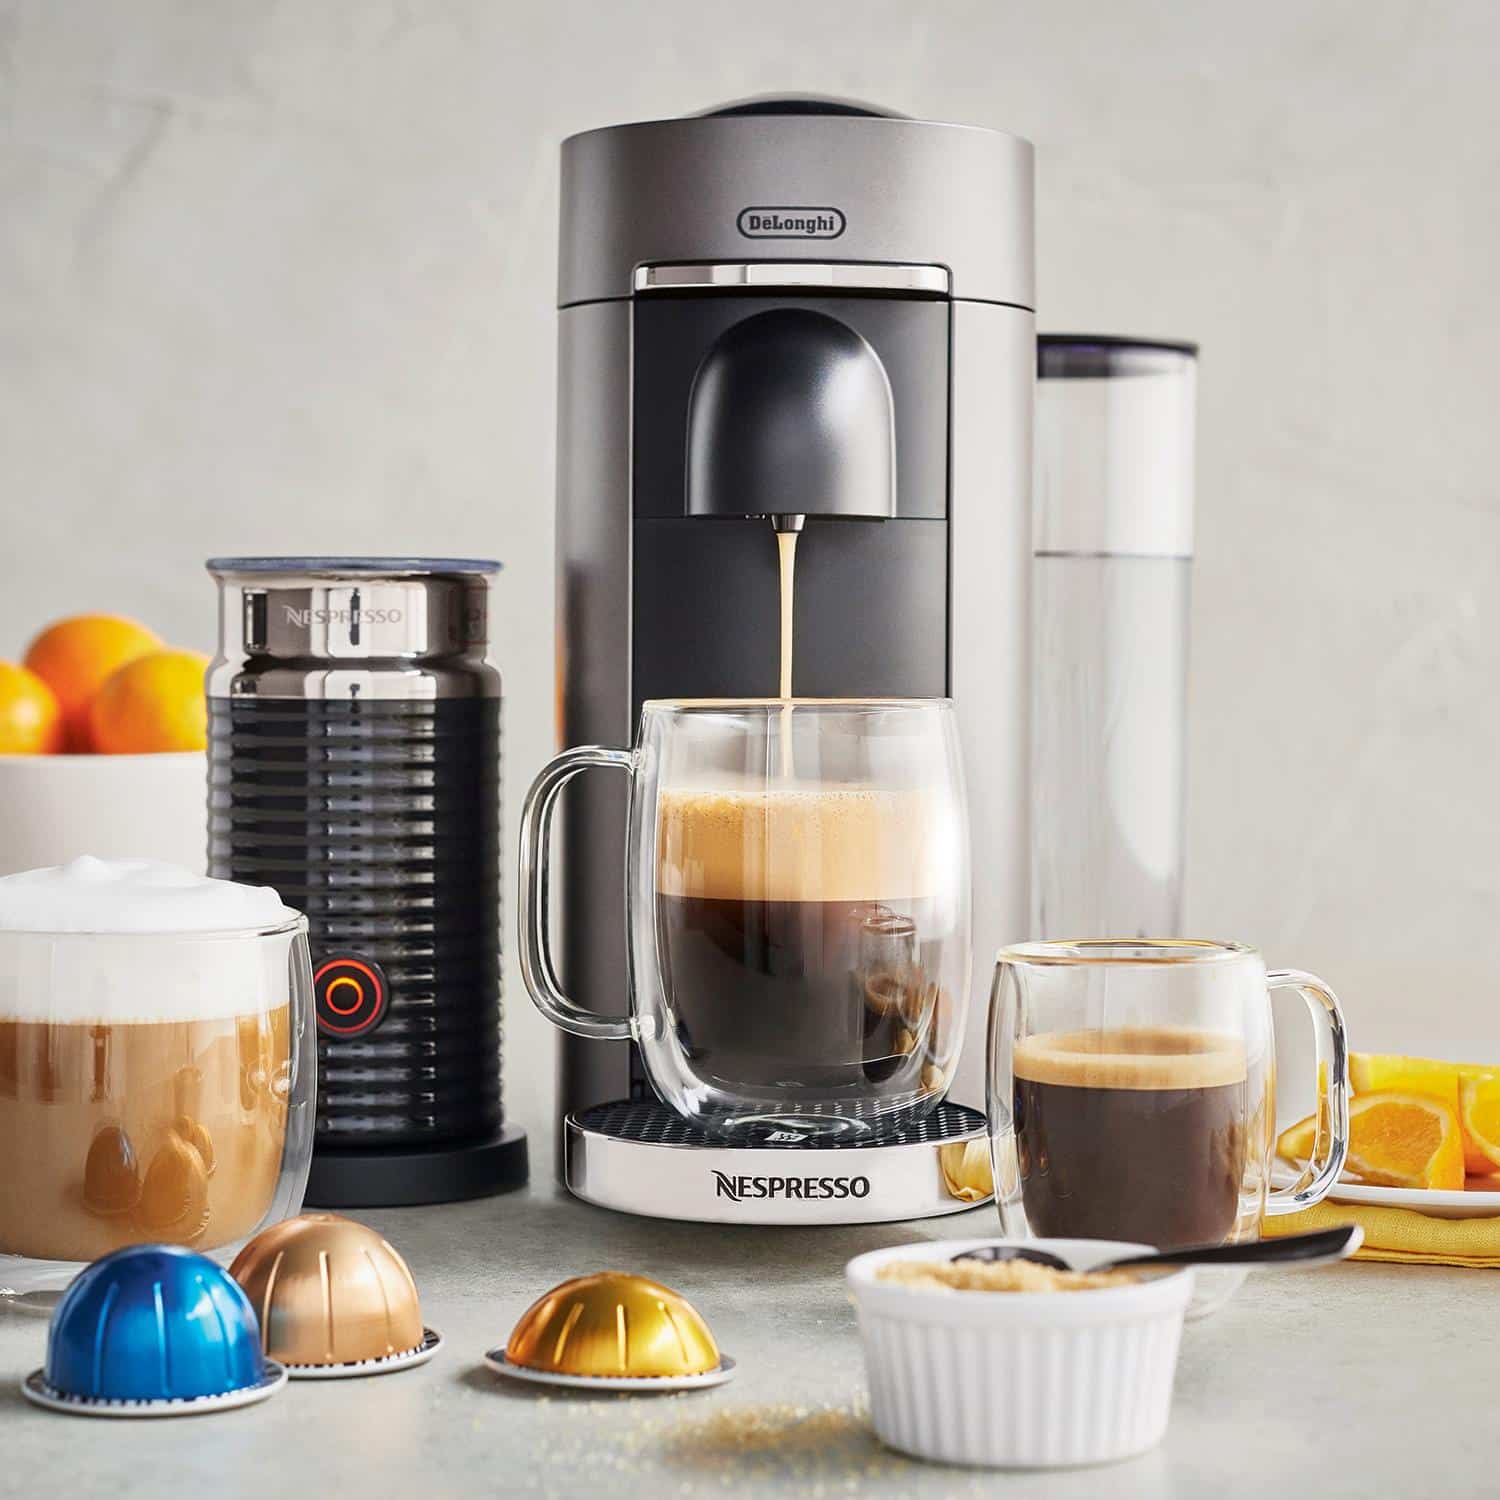 coffee makers, coffee maker buying guide, espresso machine buying guide, coffee maker vs espresso machine